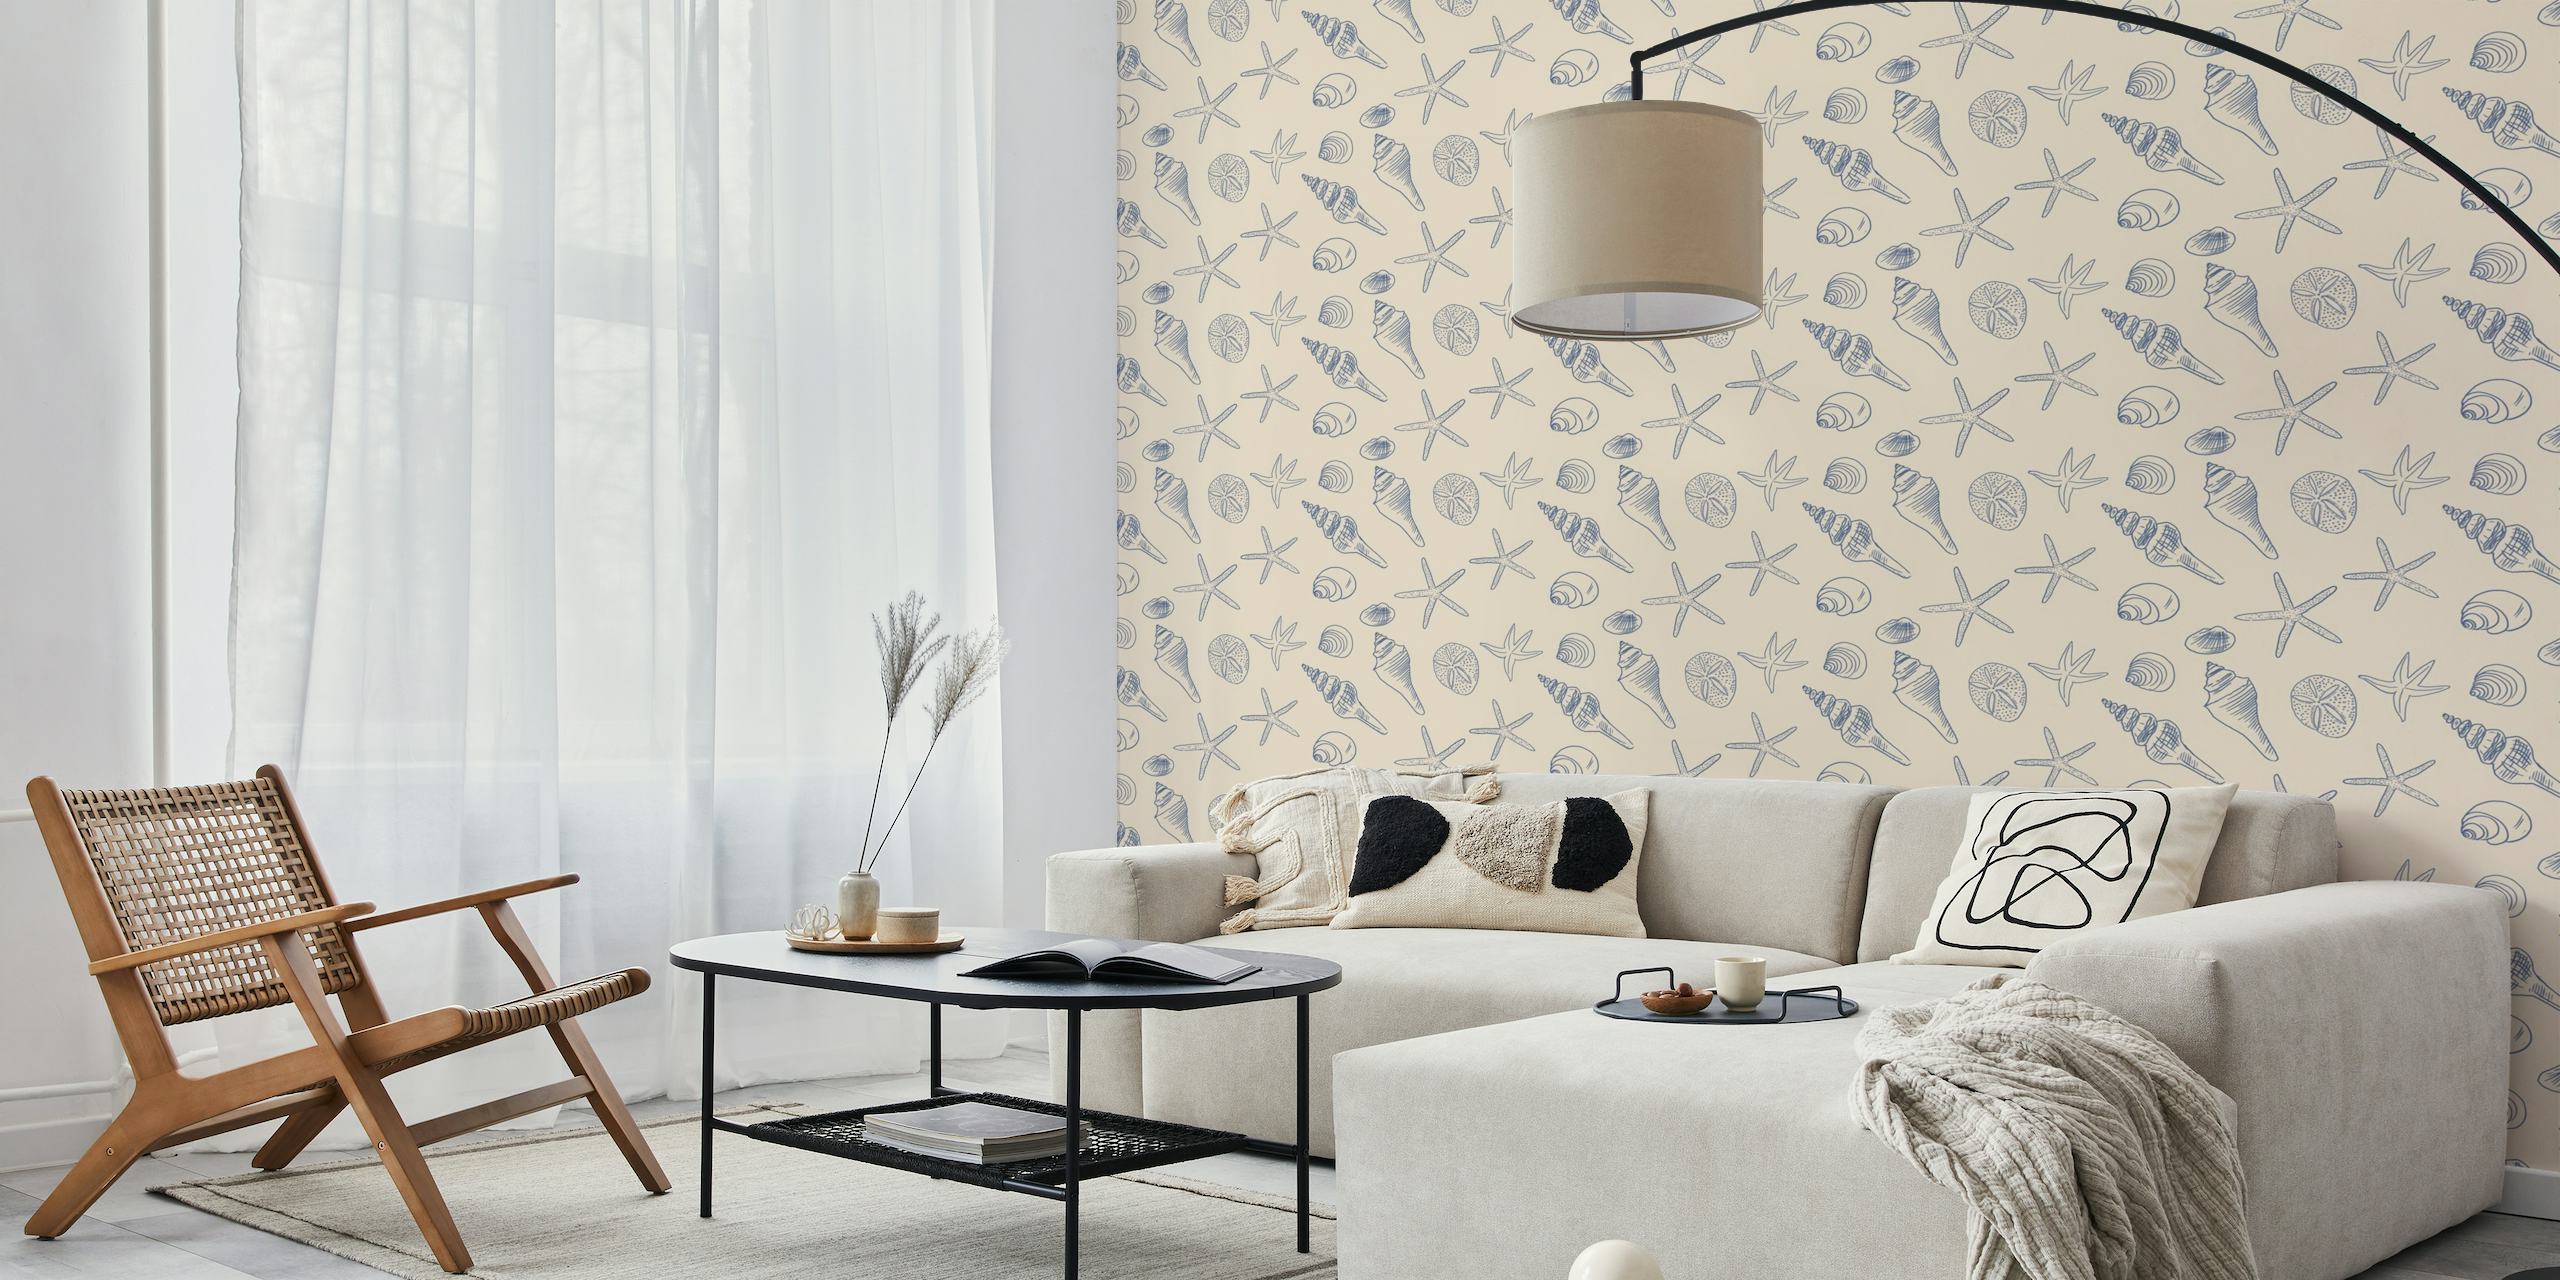 Illustration of seashells and starfish in blue and ivory tones on a wall mural